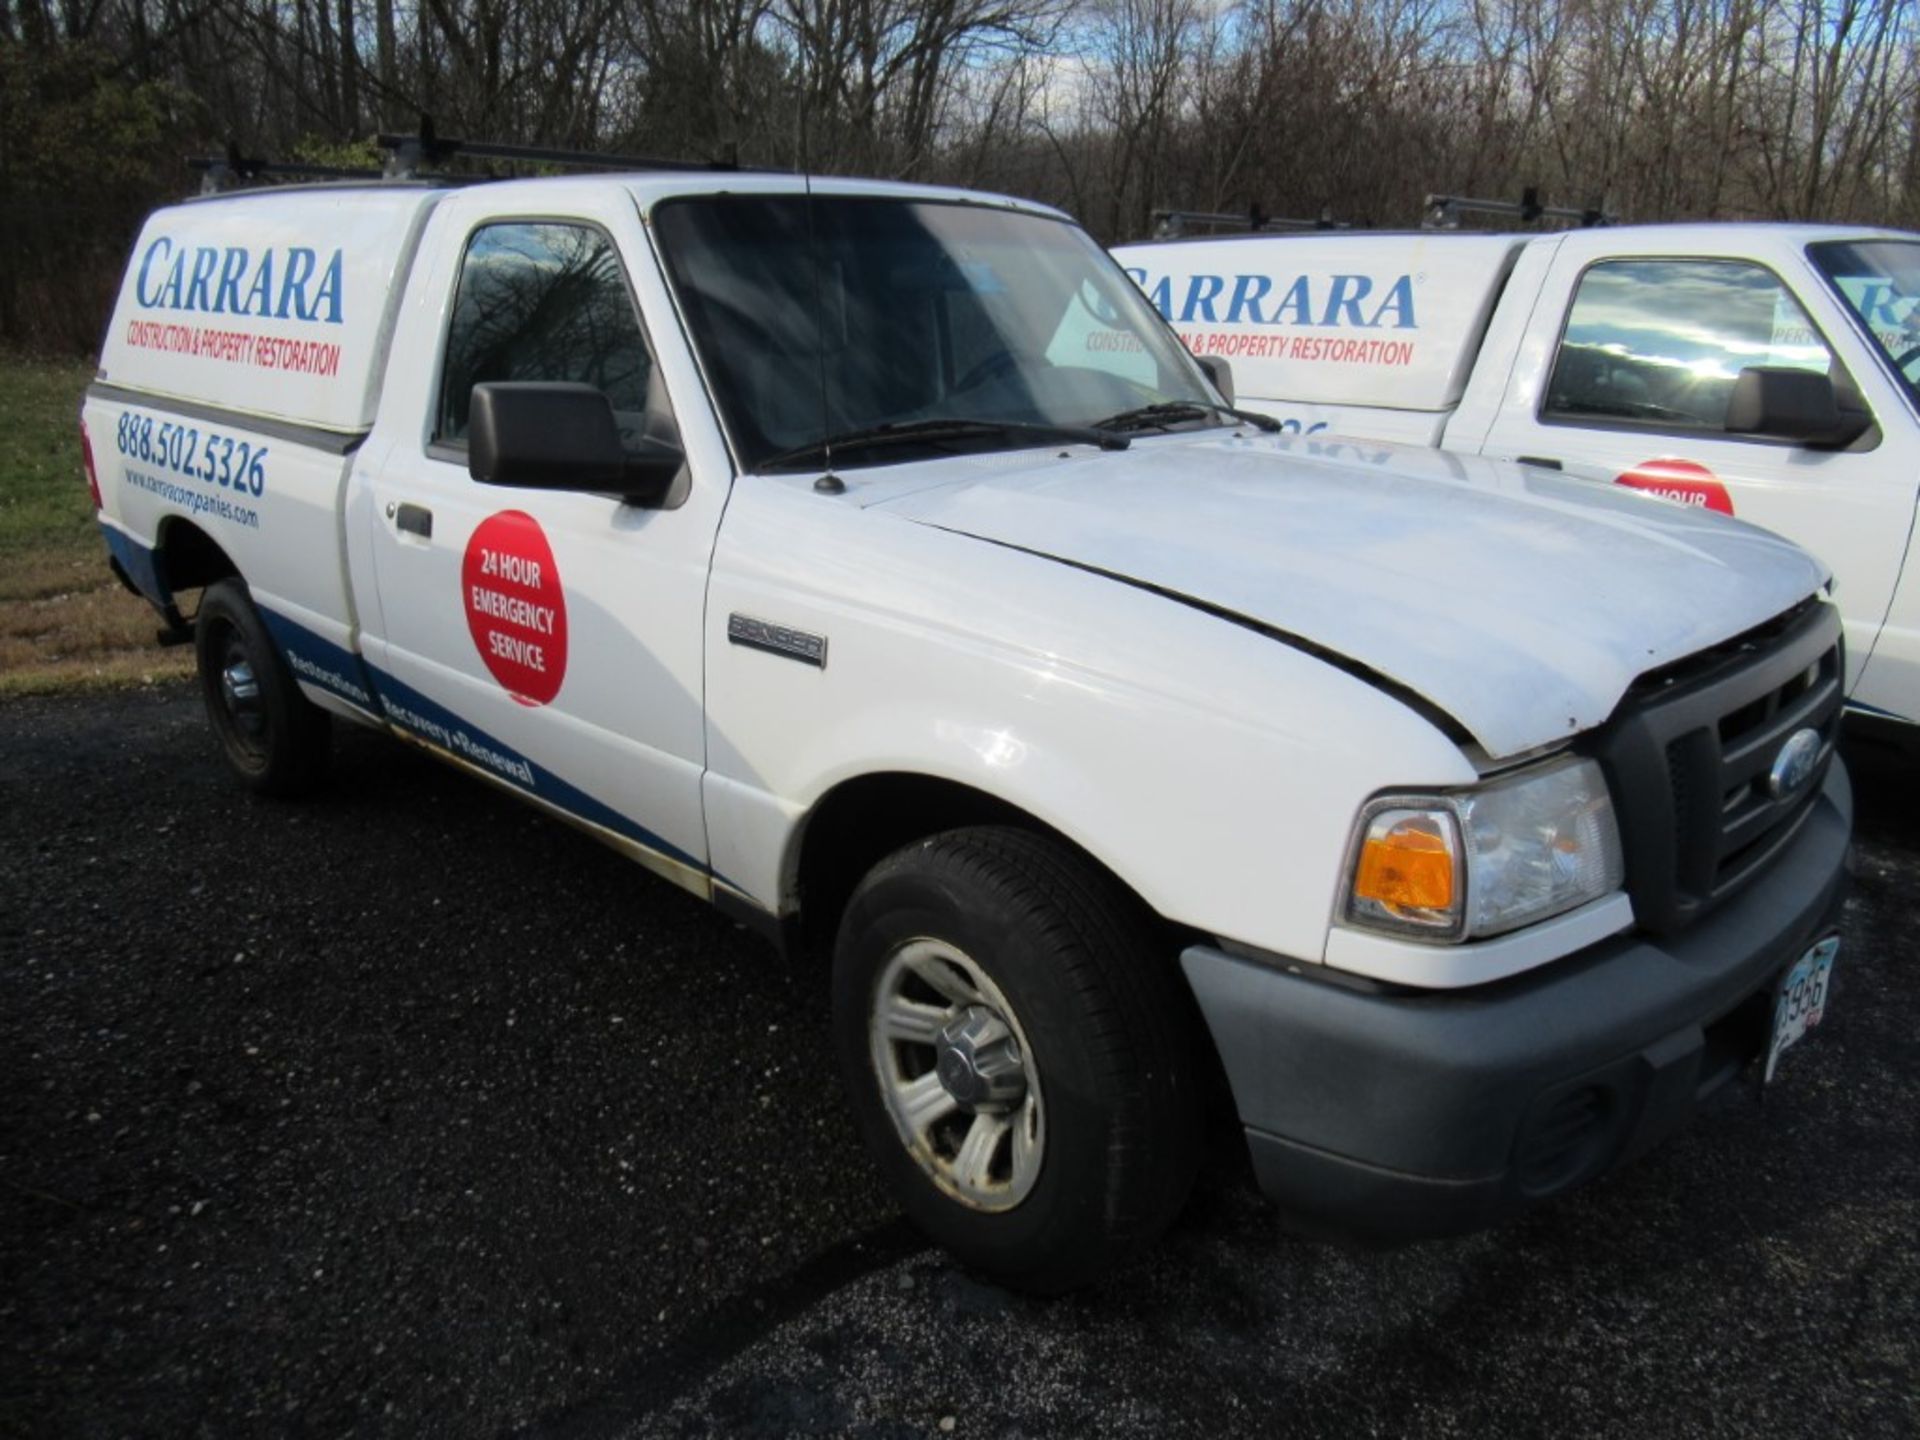 2009 Ford Ranger Pickup, VIN 1FTYR10D79PA62694, Regular Cab, Automatic, AC, AM/FM, Cap, Started with - Image 4 of 25